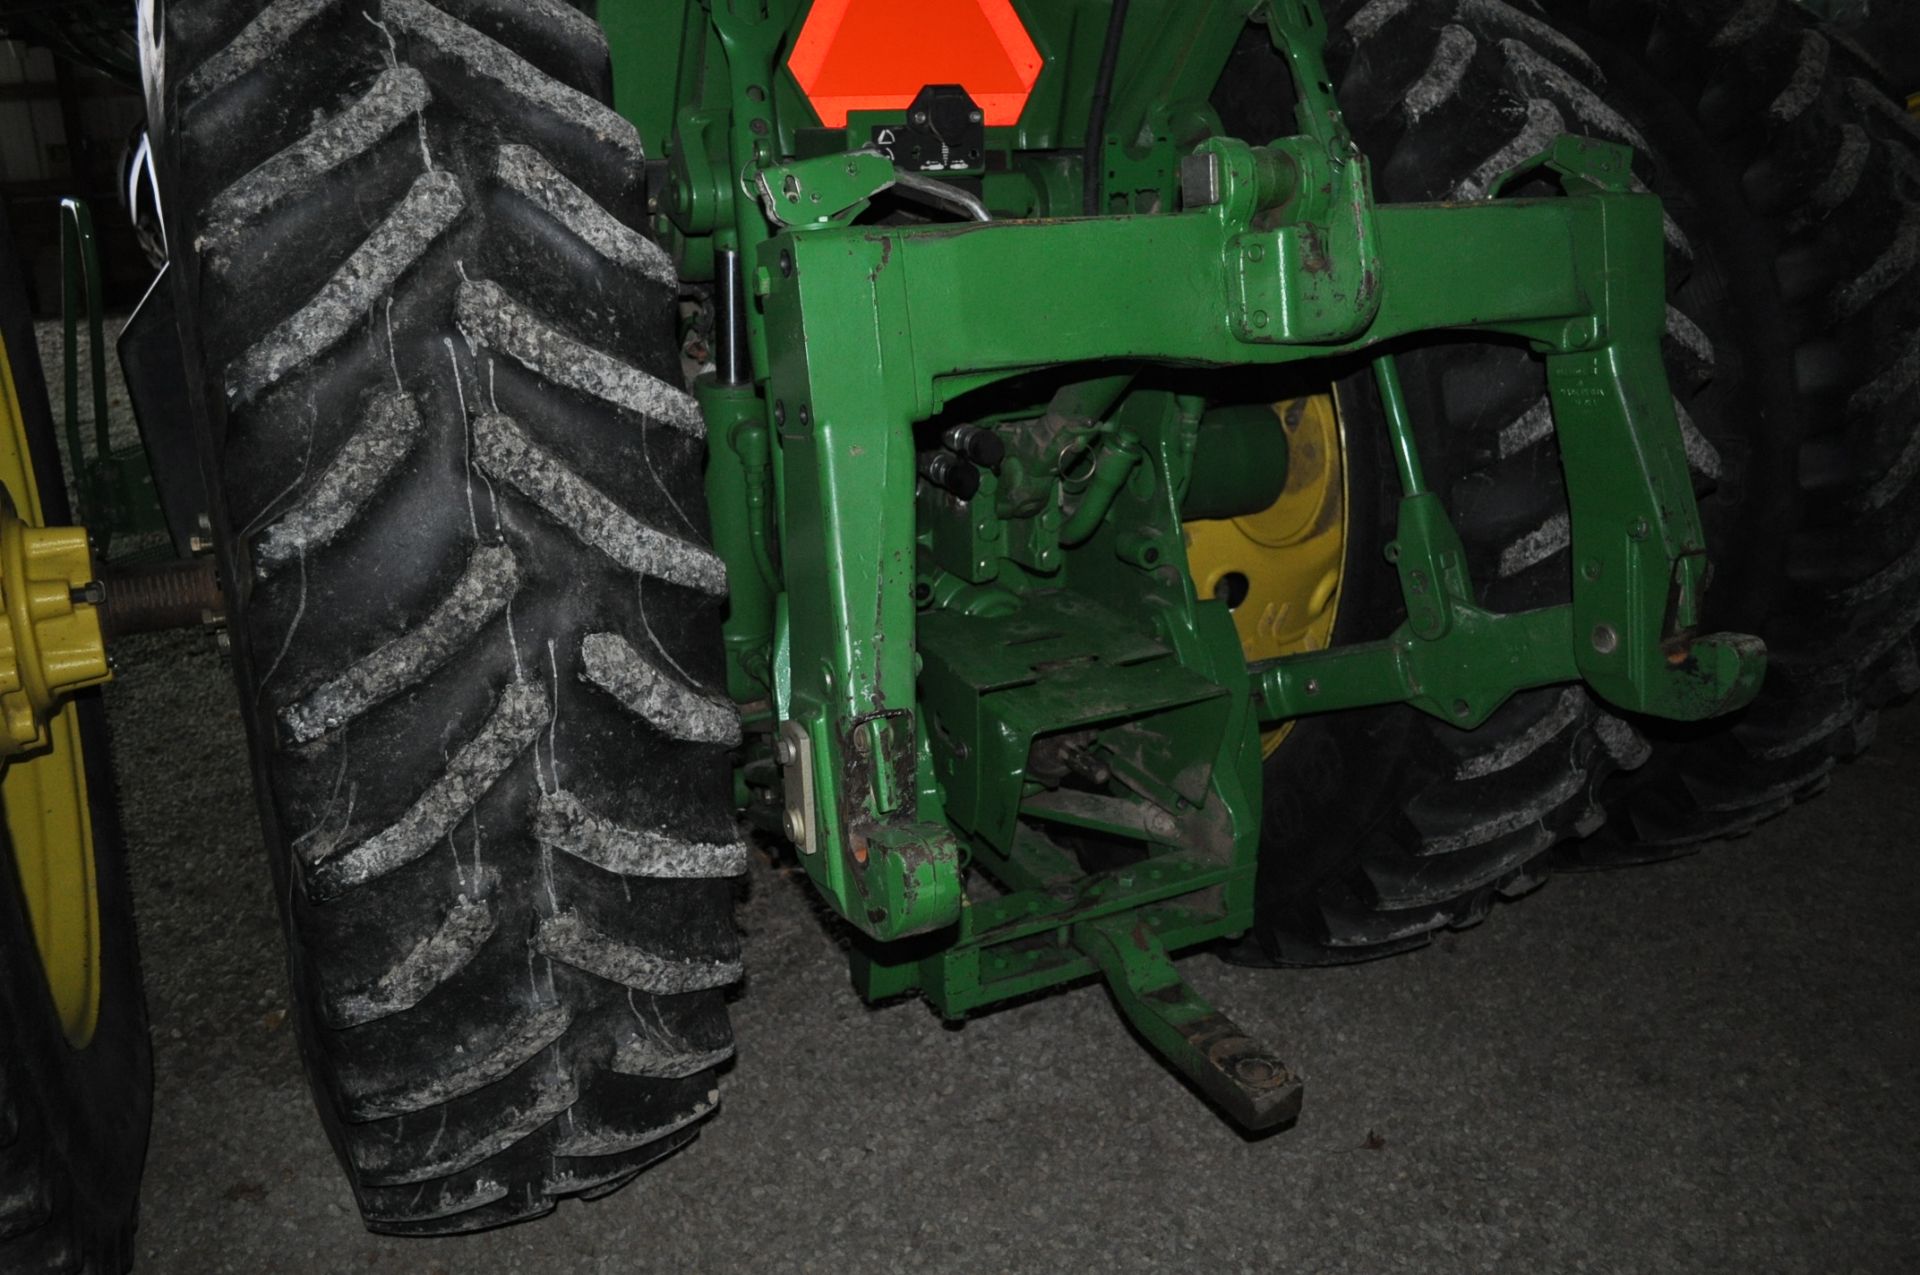 John Deere 8100 MFWD tractor, 18.4 R 46 duals, 14.9 R 34 front, PS, 4 hyd remotes, PTO, 3 pt - Image 12 of 19